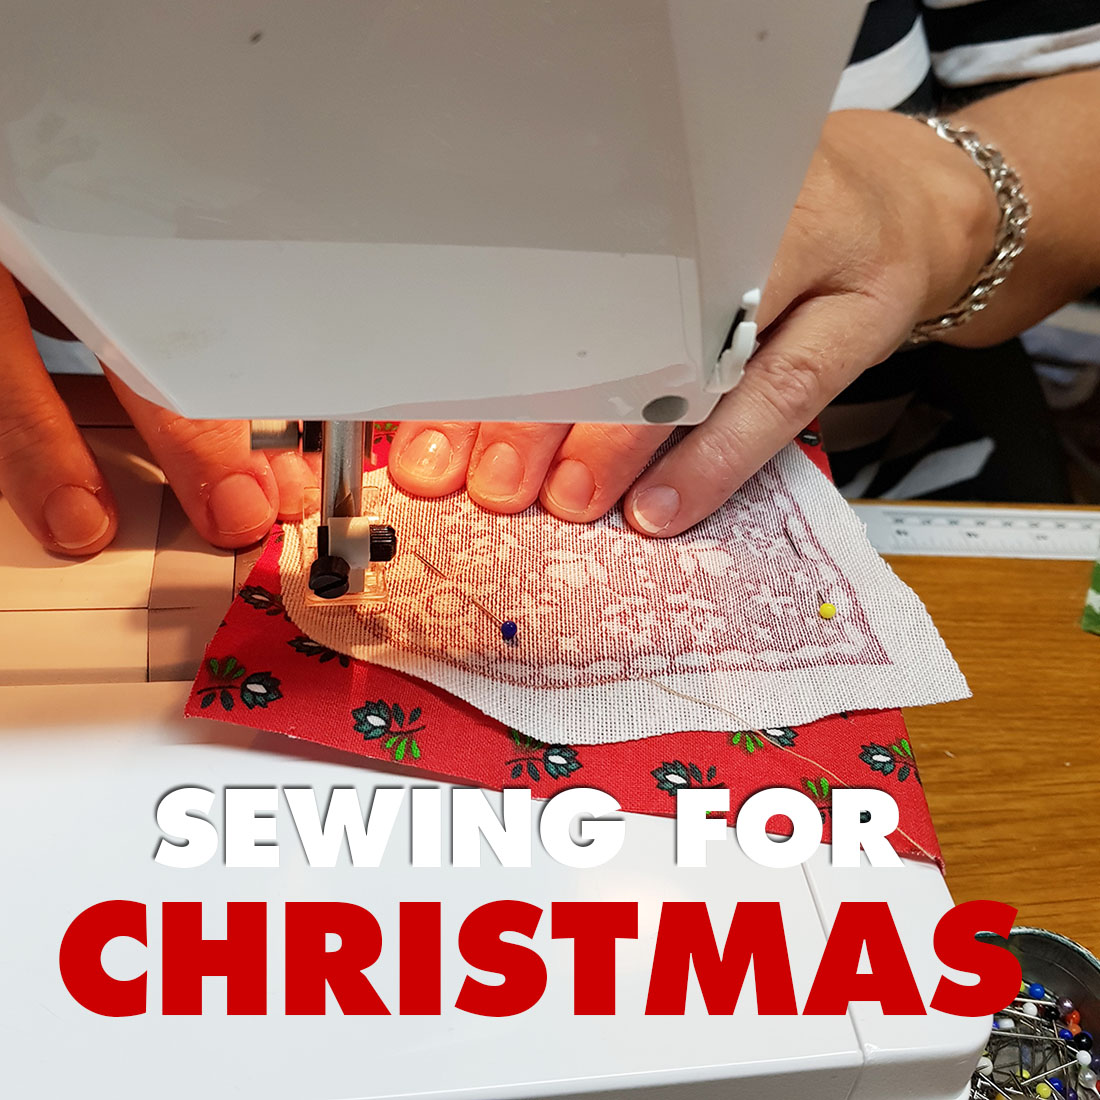 Quilting / Sewing a Christmas table runner 